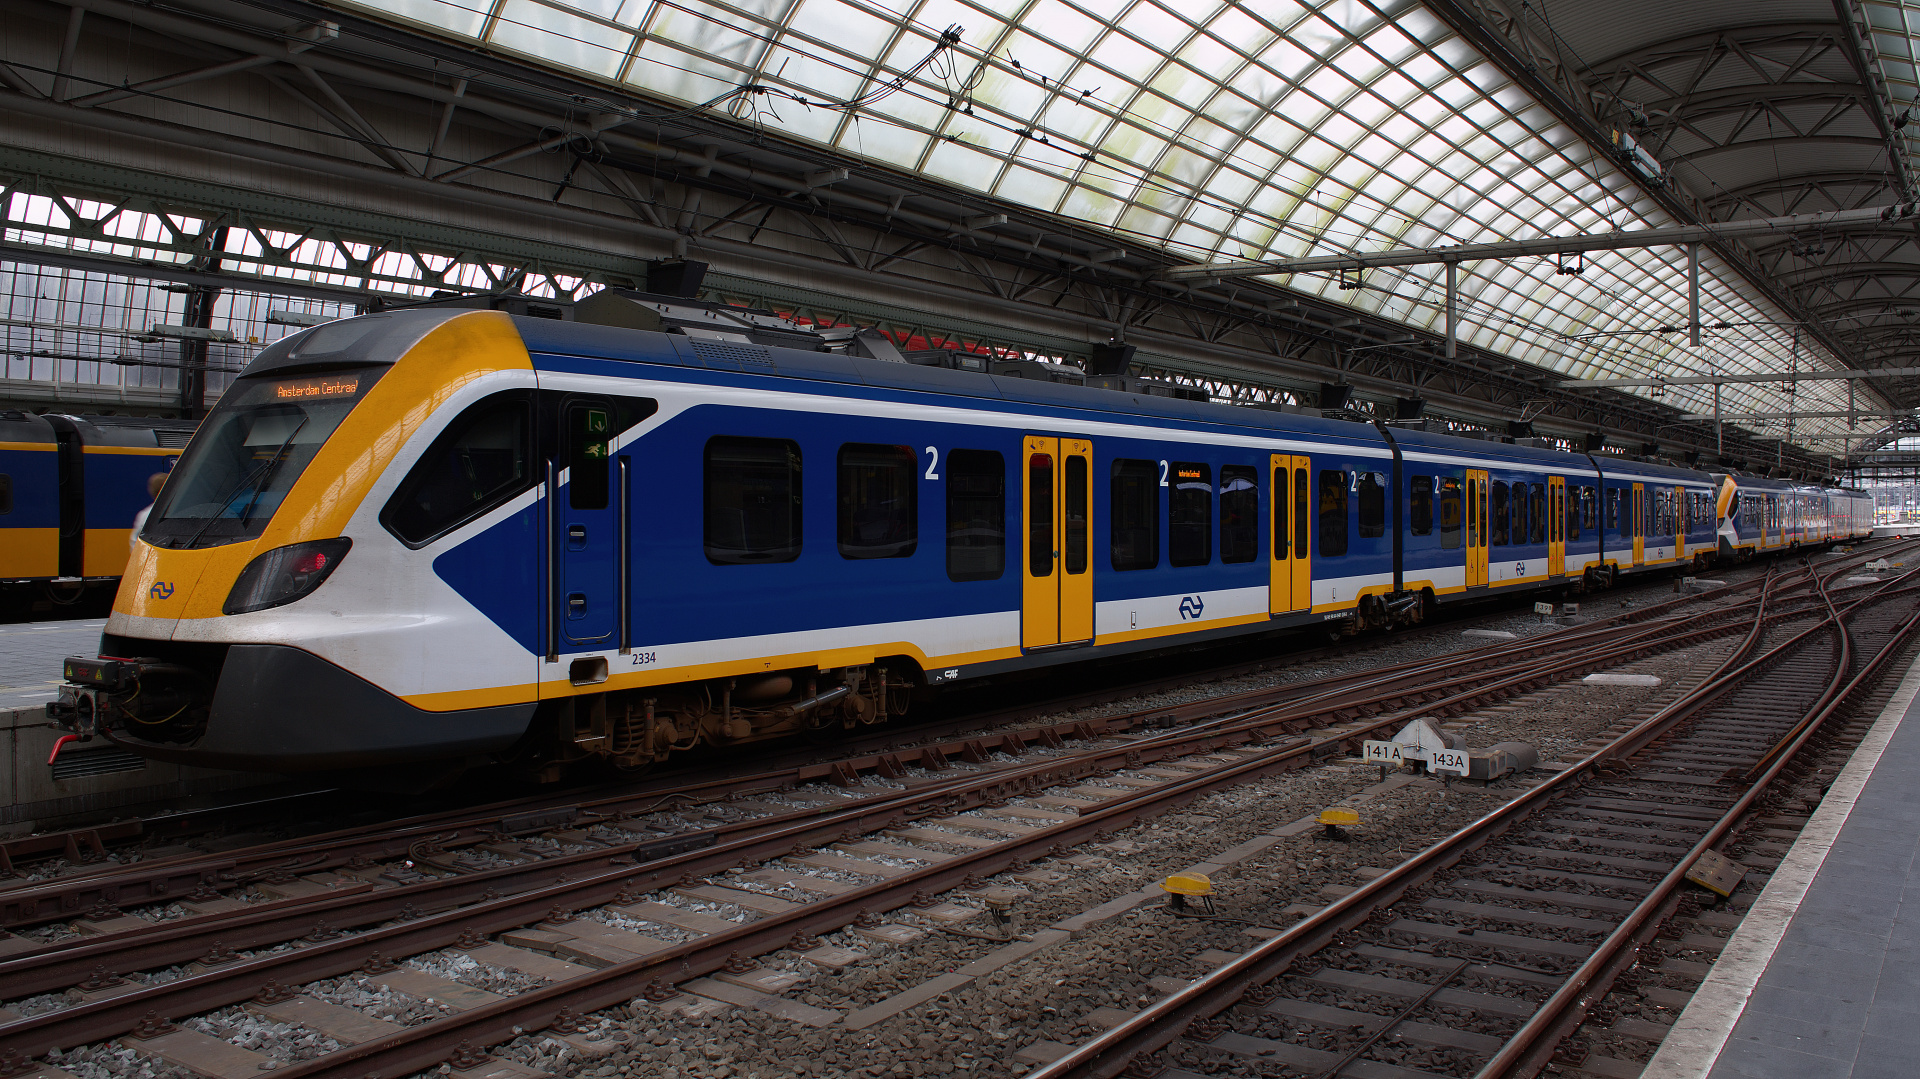 CAF Civity (SNG) 2334 (Travels » Amsterdam » Vehicles » Trains and Locomotives)